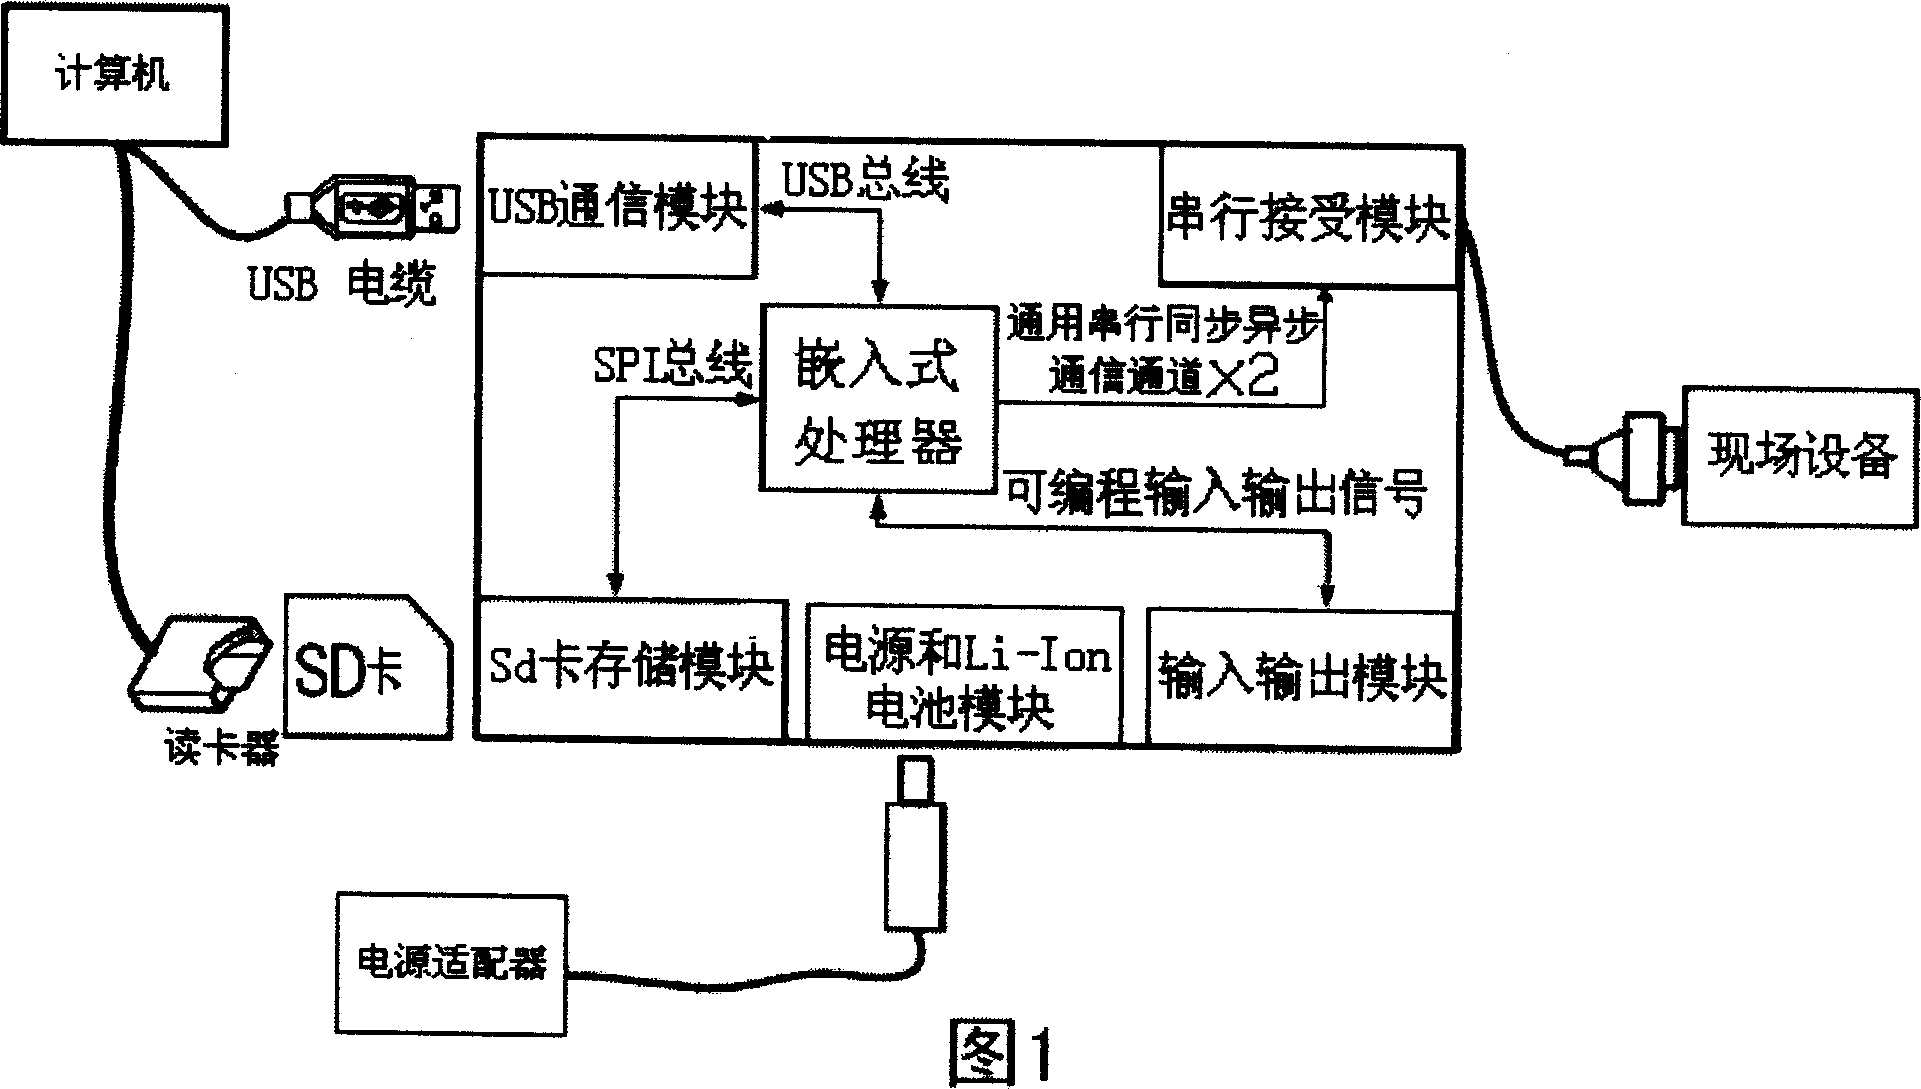 Portable serial number recorder and implementation method